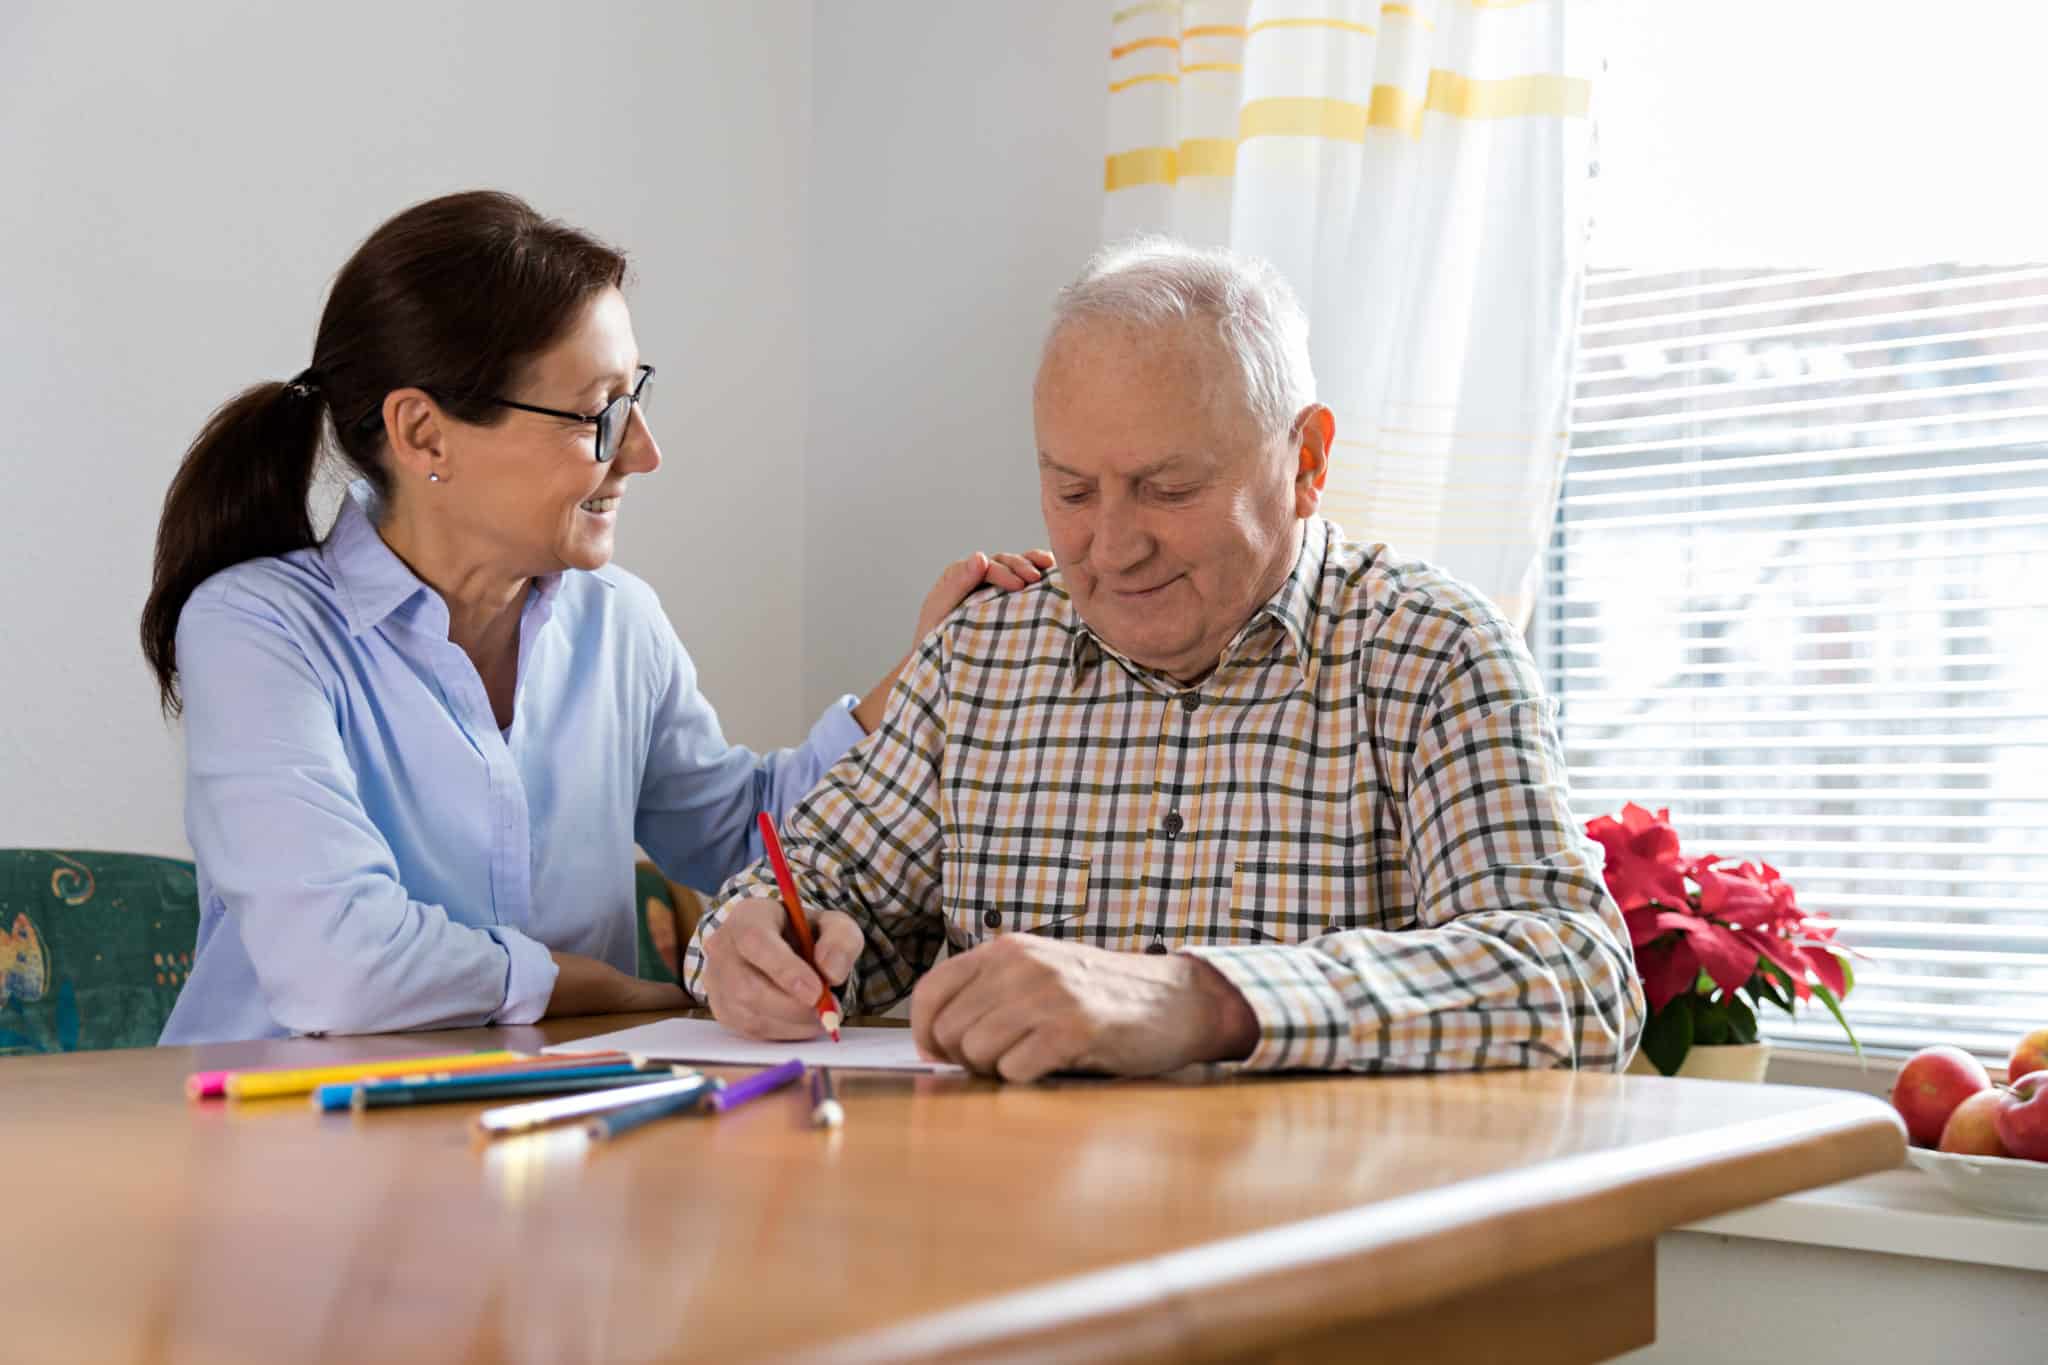 Dementia and Occupational Therapy - Home caregiver and senior adult man